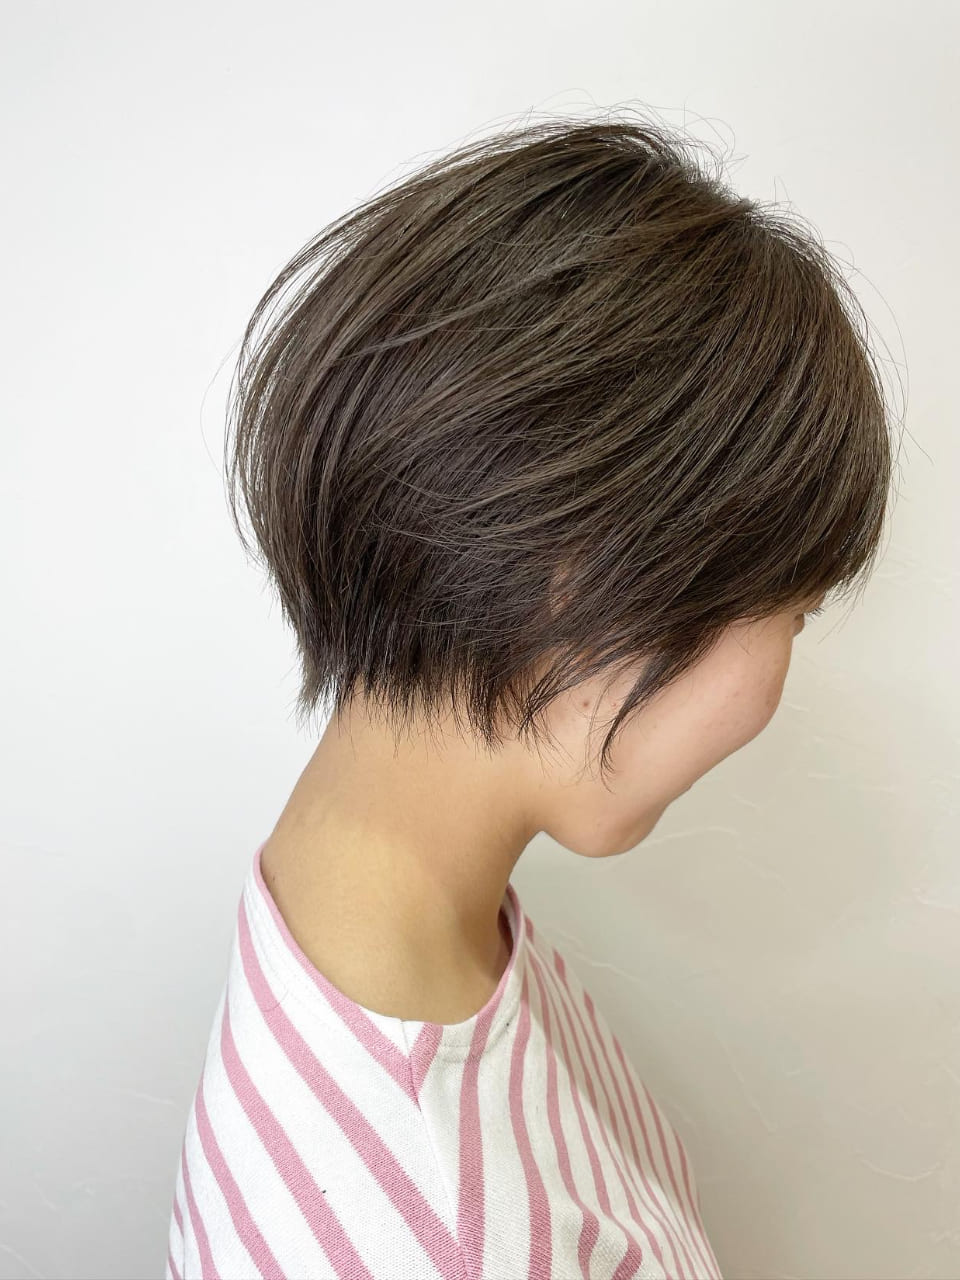 <!-- hairstyle-10 -->